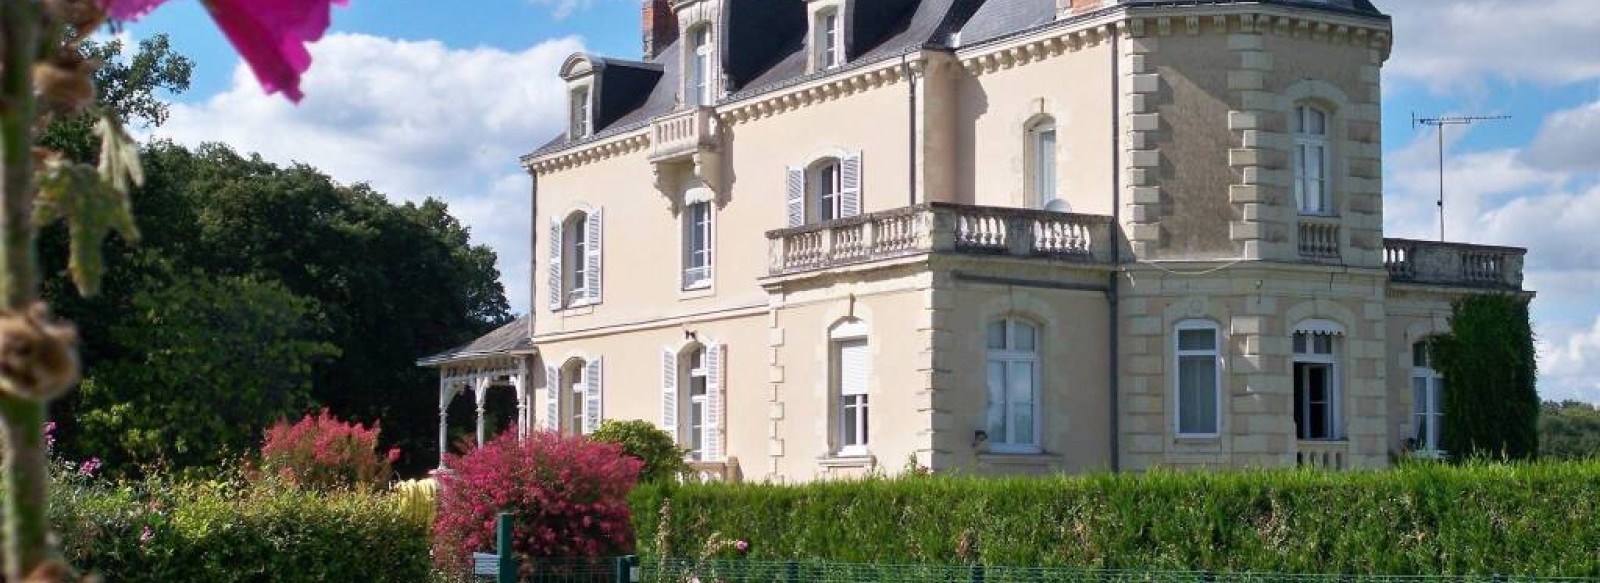 CHAMBRES D'HOTES AU CHATEAU VARY